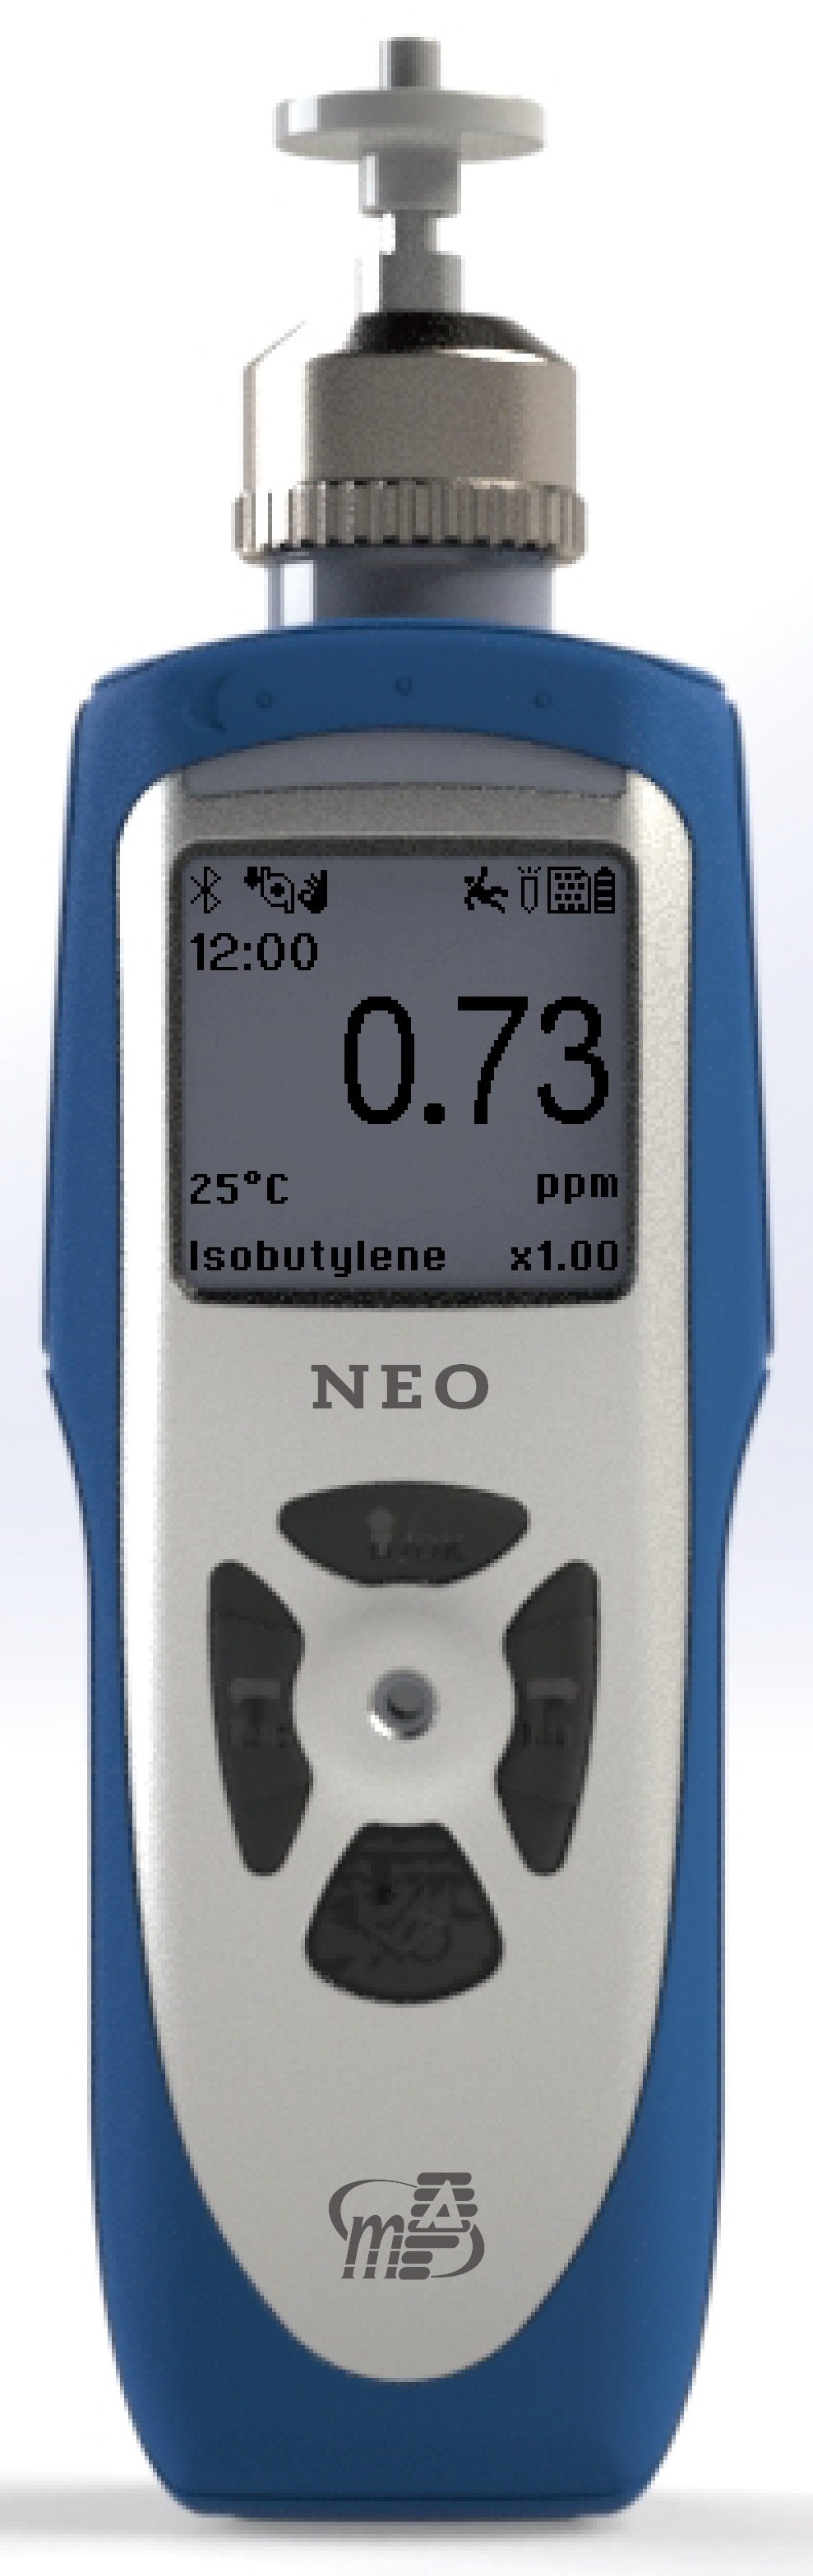 MP182 EXT NEO Photo-ionization Detector, Wireless Bluetooth with Accessories Hard Case